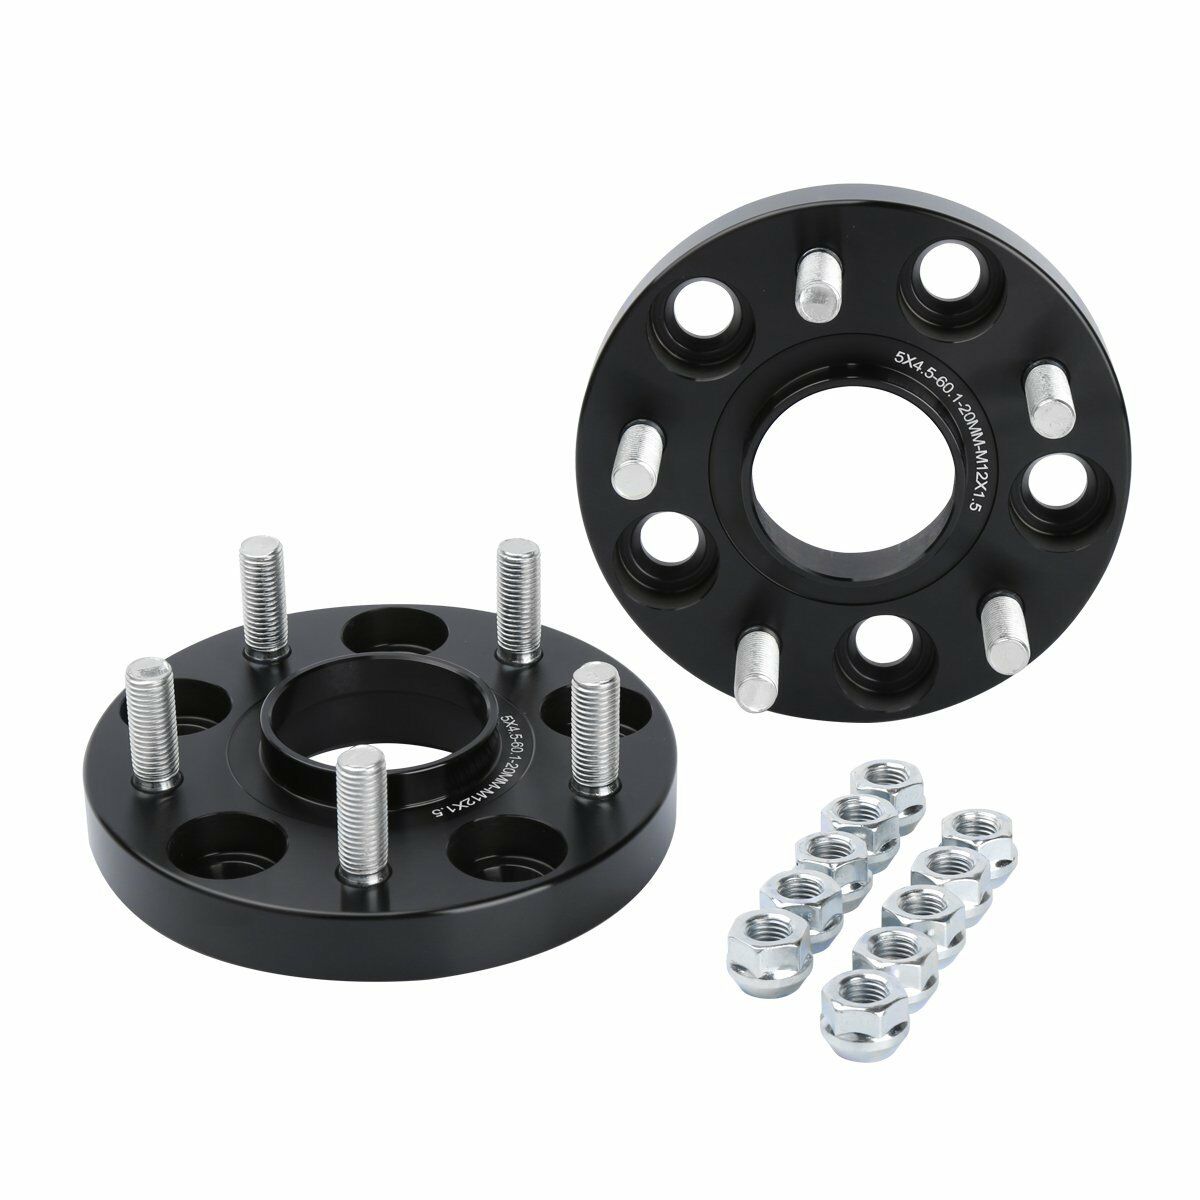 Wheel Spacers 20mm 5x4.5 For Toyota RAV4 Camry Tacoma Avalon Hubcentric Forged xccscss.